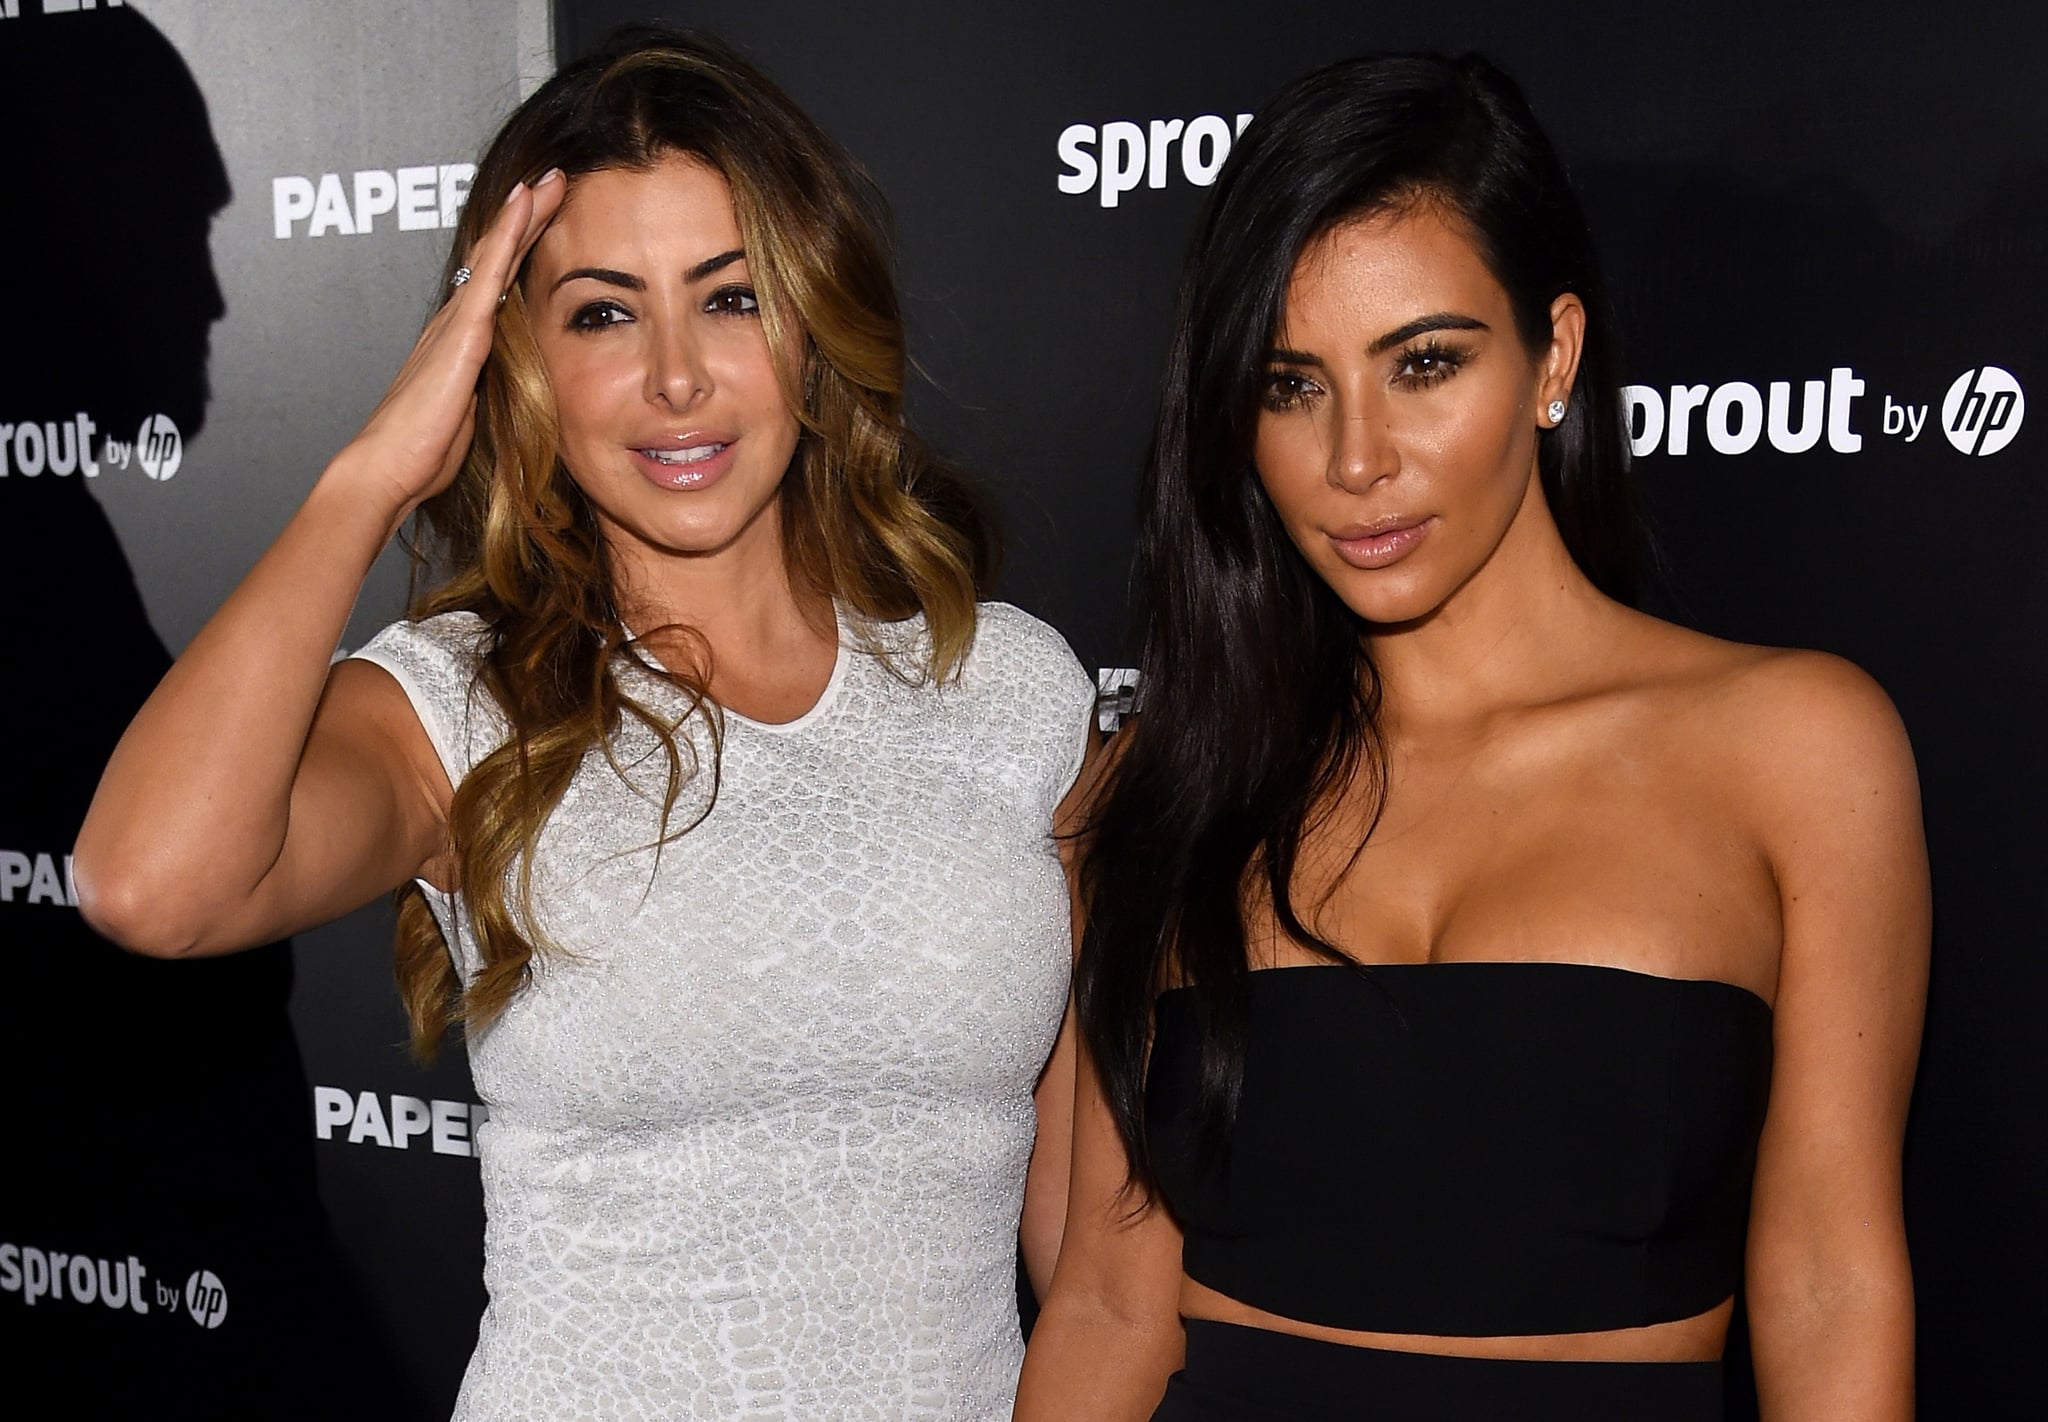 What Happened Between Larsa Pippen and the Kardashians?